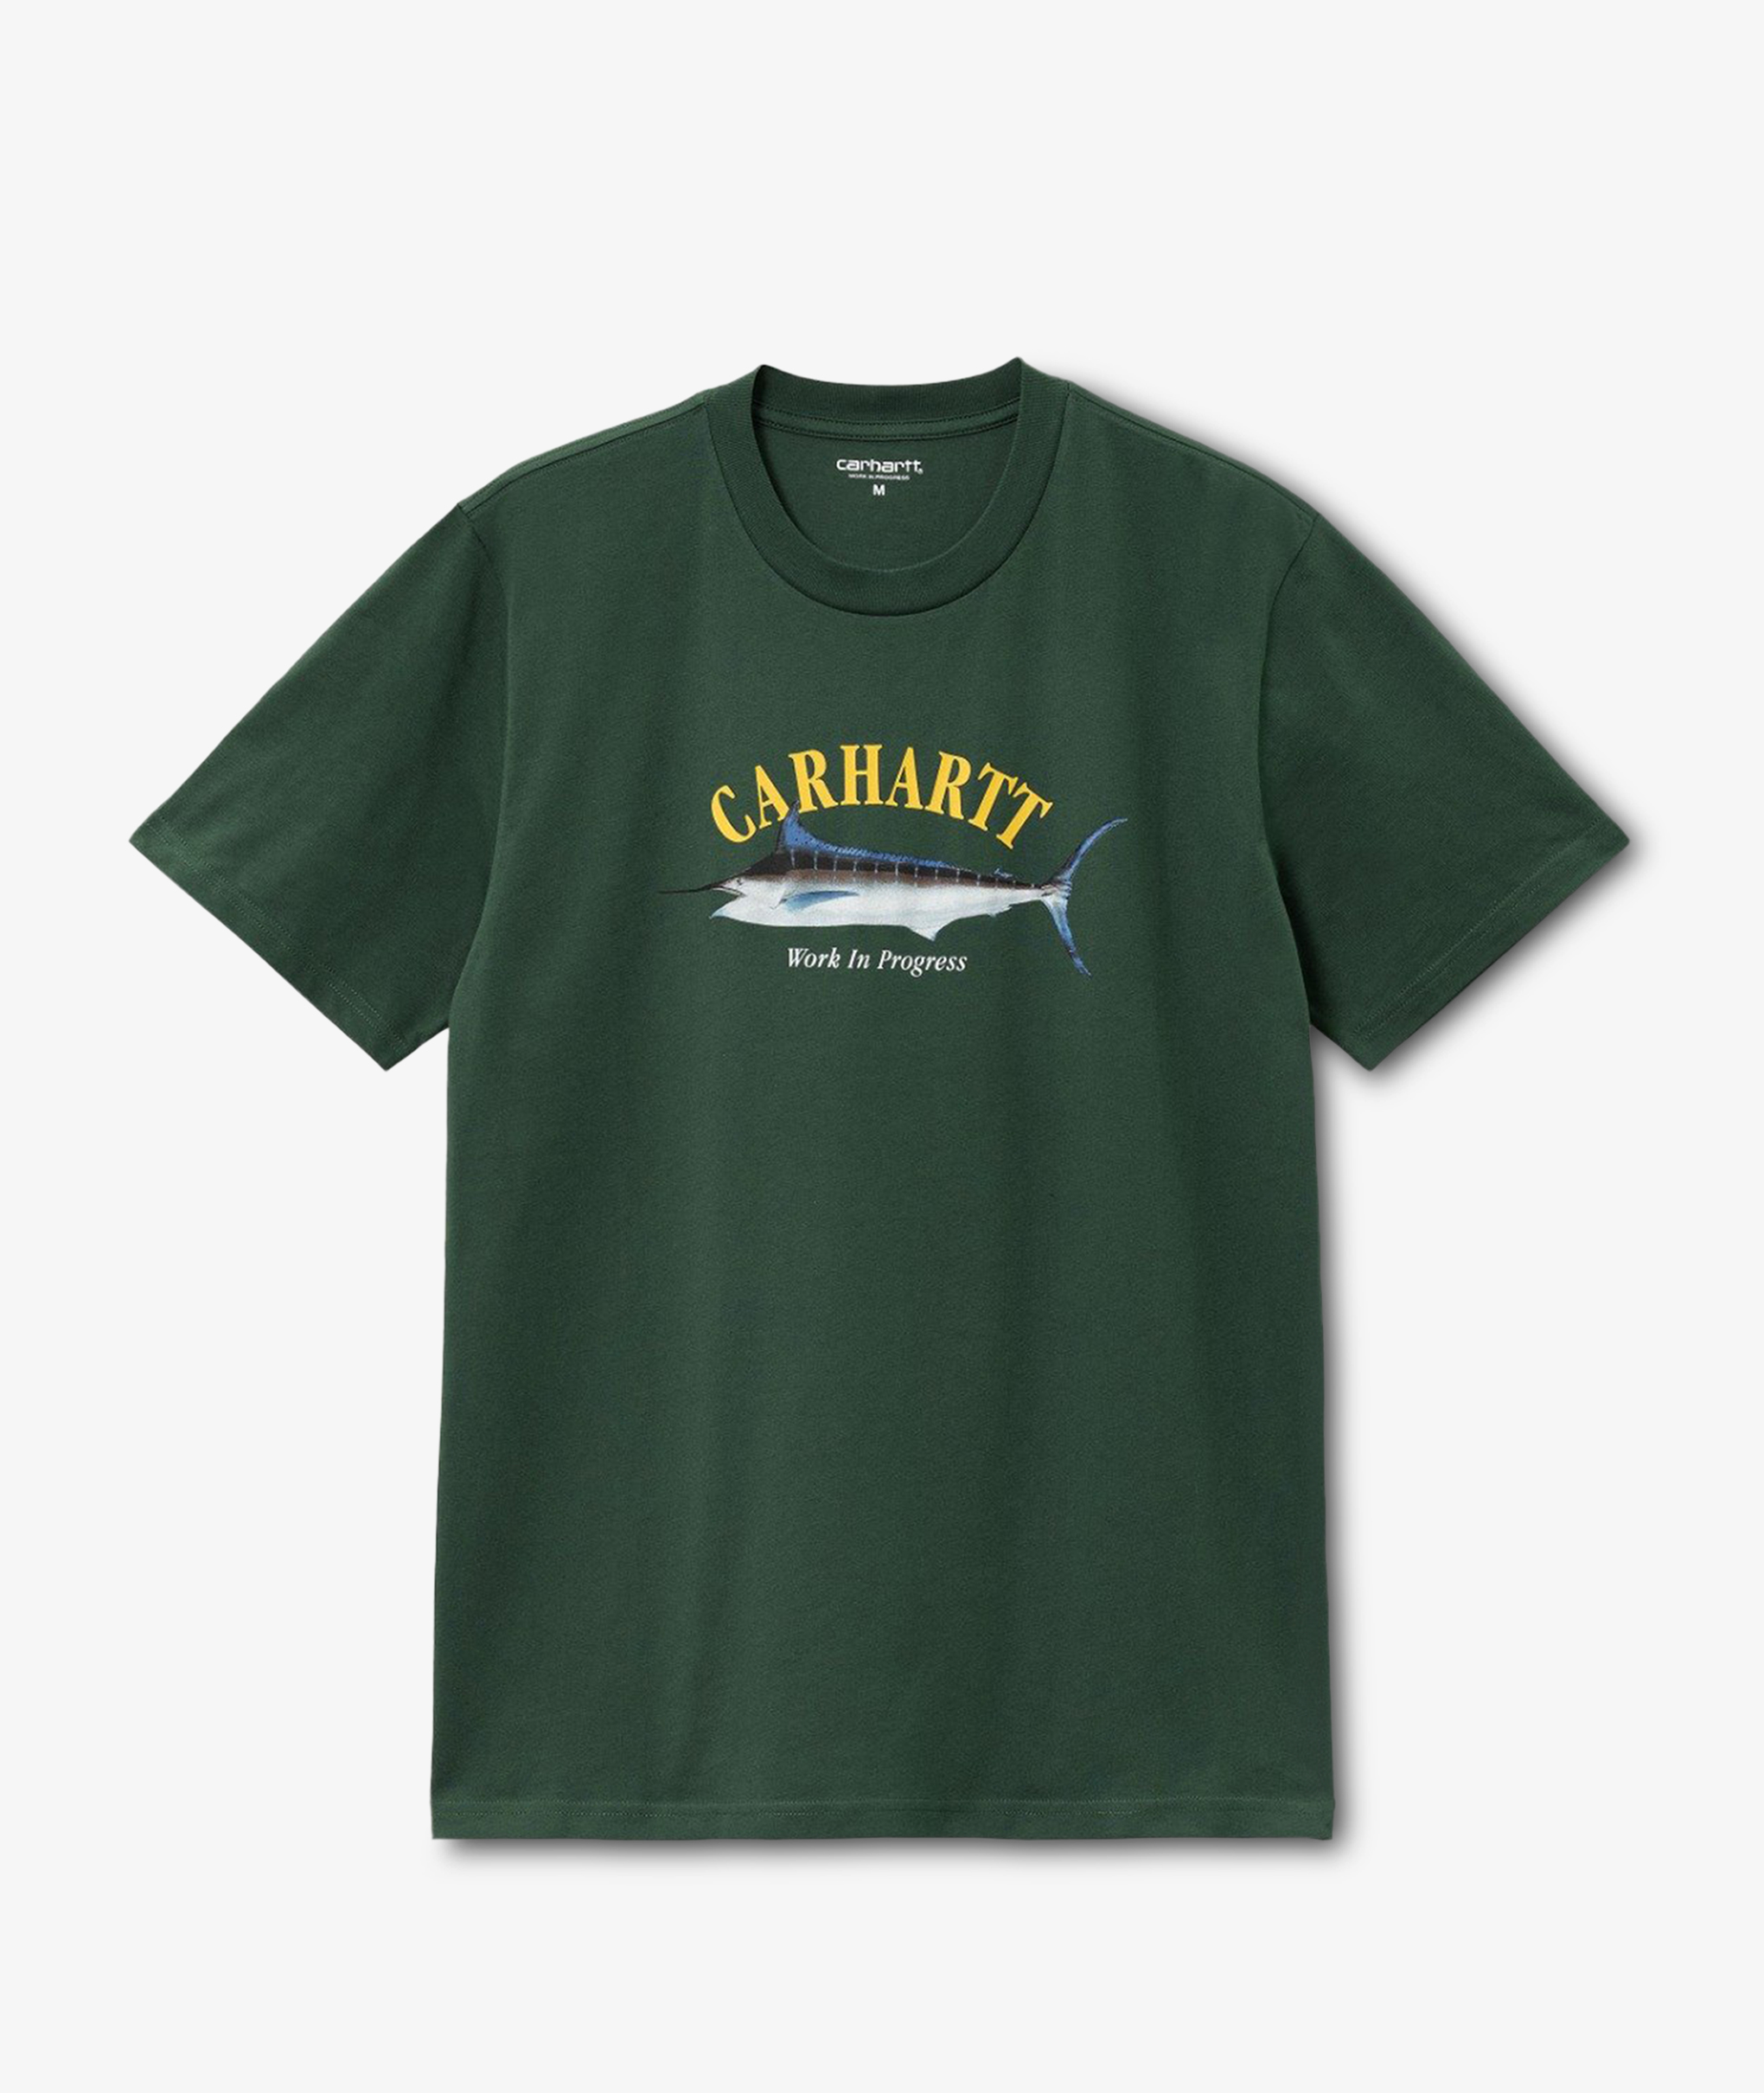 Norse Store  Shipping Worldwide - Carhartt WIP S/S Marlin T-Shirt -  Treehouse